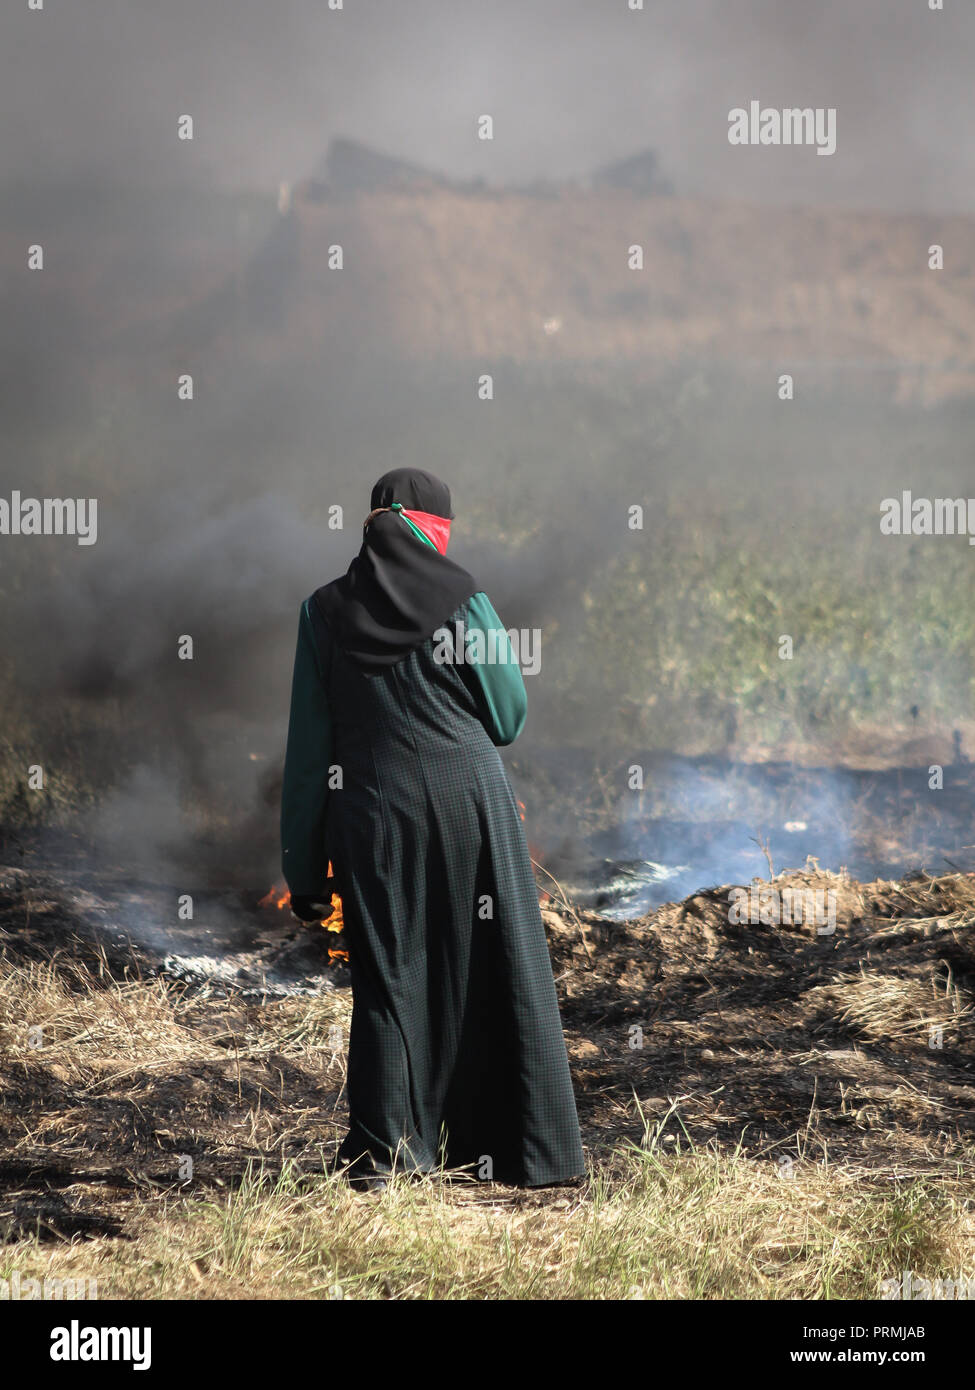 Palestinian girl in front of Israeli soldiers on the Israel-Gaza border during a  protest demanding the right to return to their homeland. Stock Photo